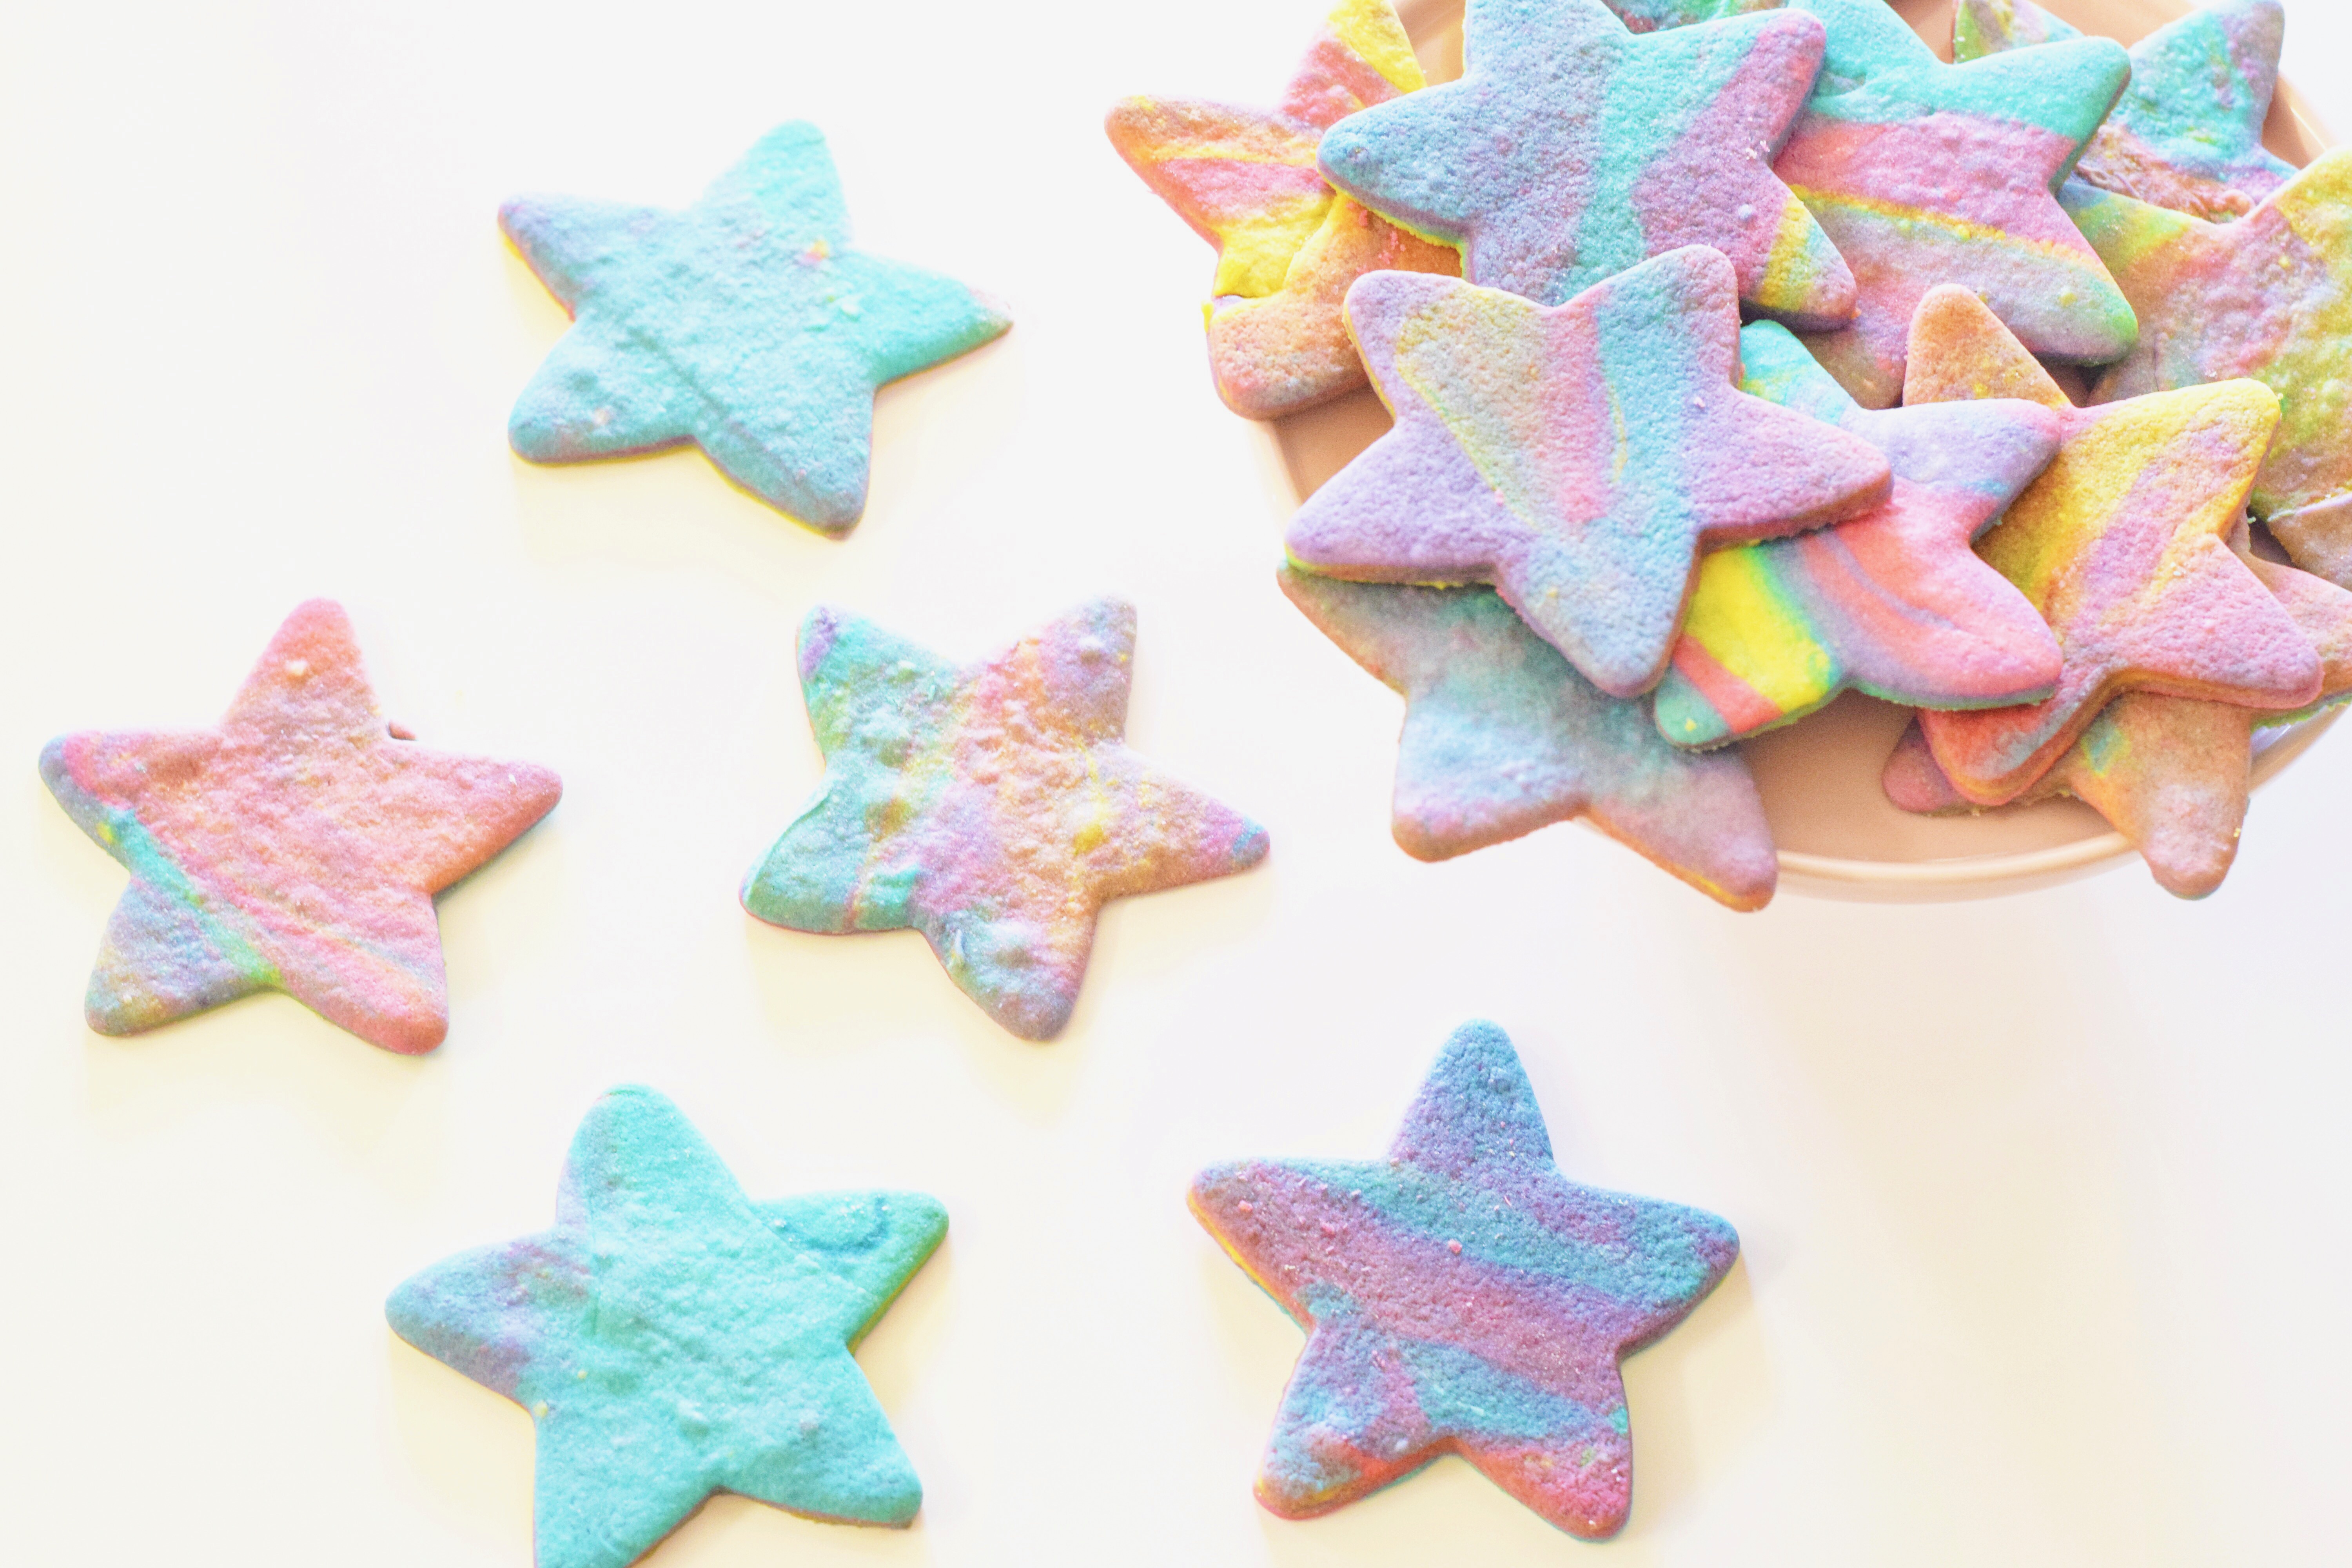 Northern Lights Sugar Cookies - Super-easy classic sugar cookies inspired by the beautiful Aurora Borealis, or Northern Lights, sky show! | Tie Dye Sugar Cookies - Best Ever Sugar Cookies - Easy Sugar Cookies - Northern Lights Cookies 